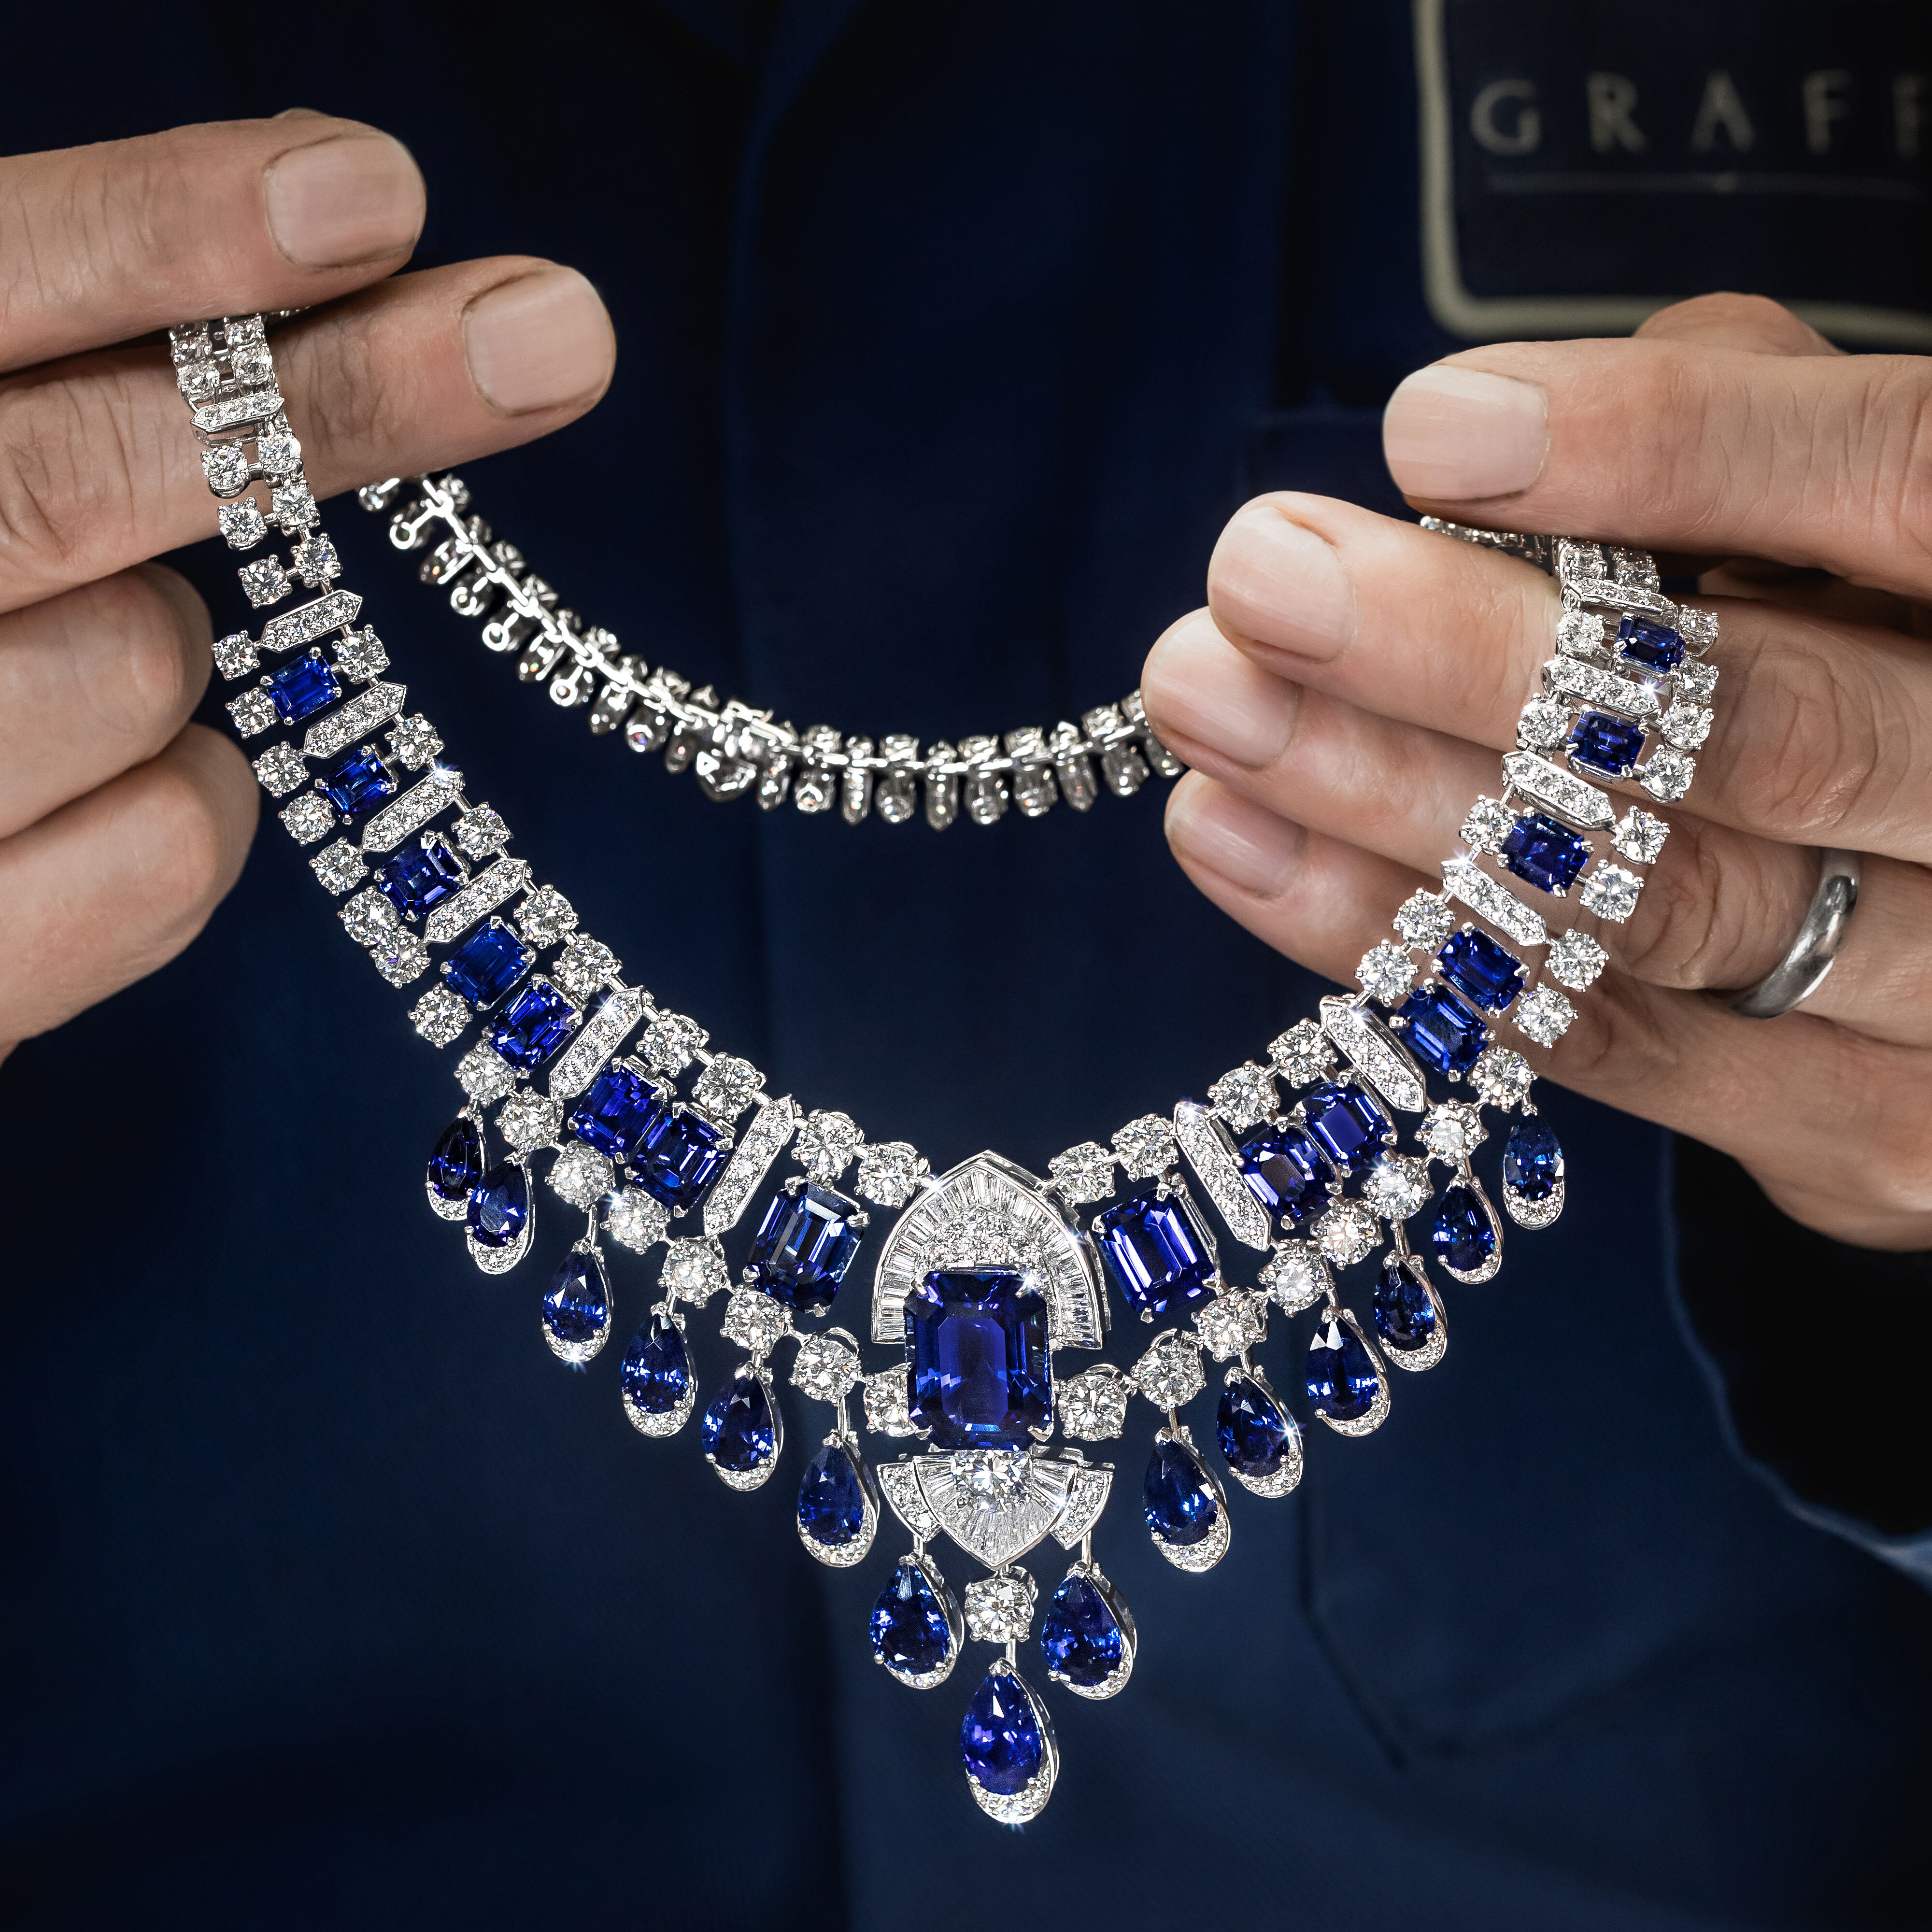 Image of Graff High Jewellery Sapphire and White Diamond necklace being finished in Graff Workshop 